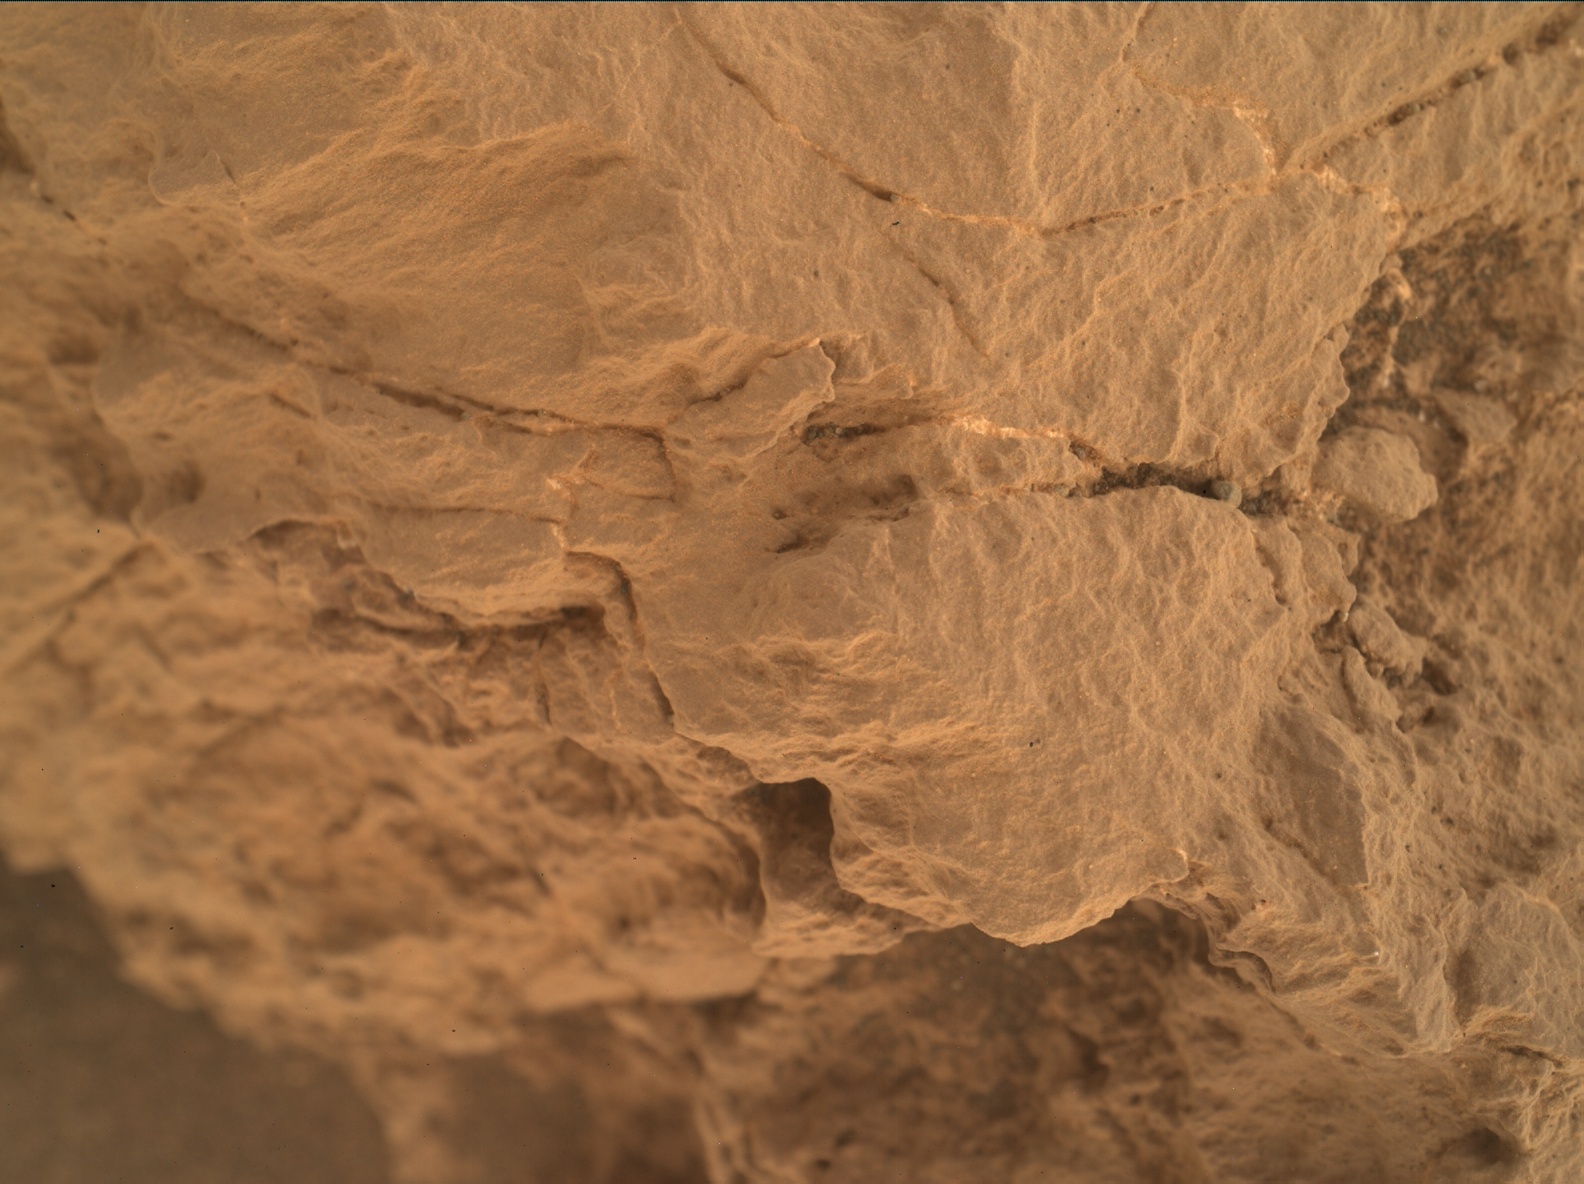 Nasa's Mars rover Curiosity acquired this image using its Mars Hand Lens Imager (MAHLI) on Sol 2161